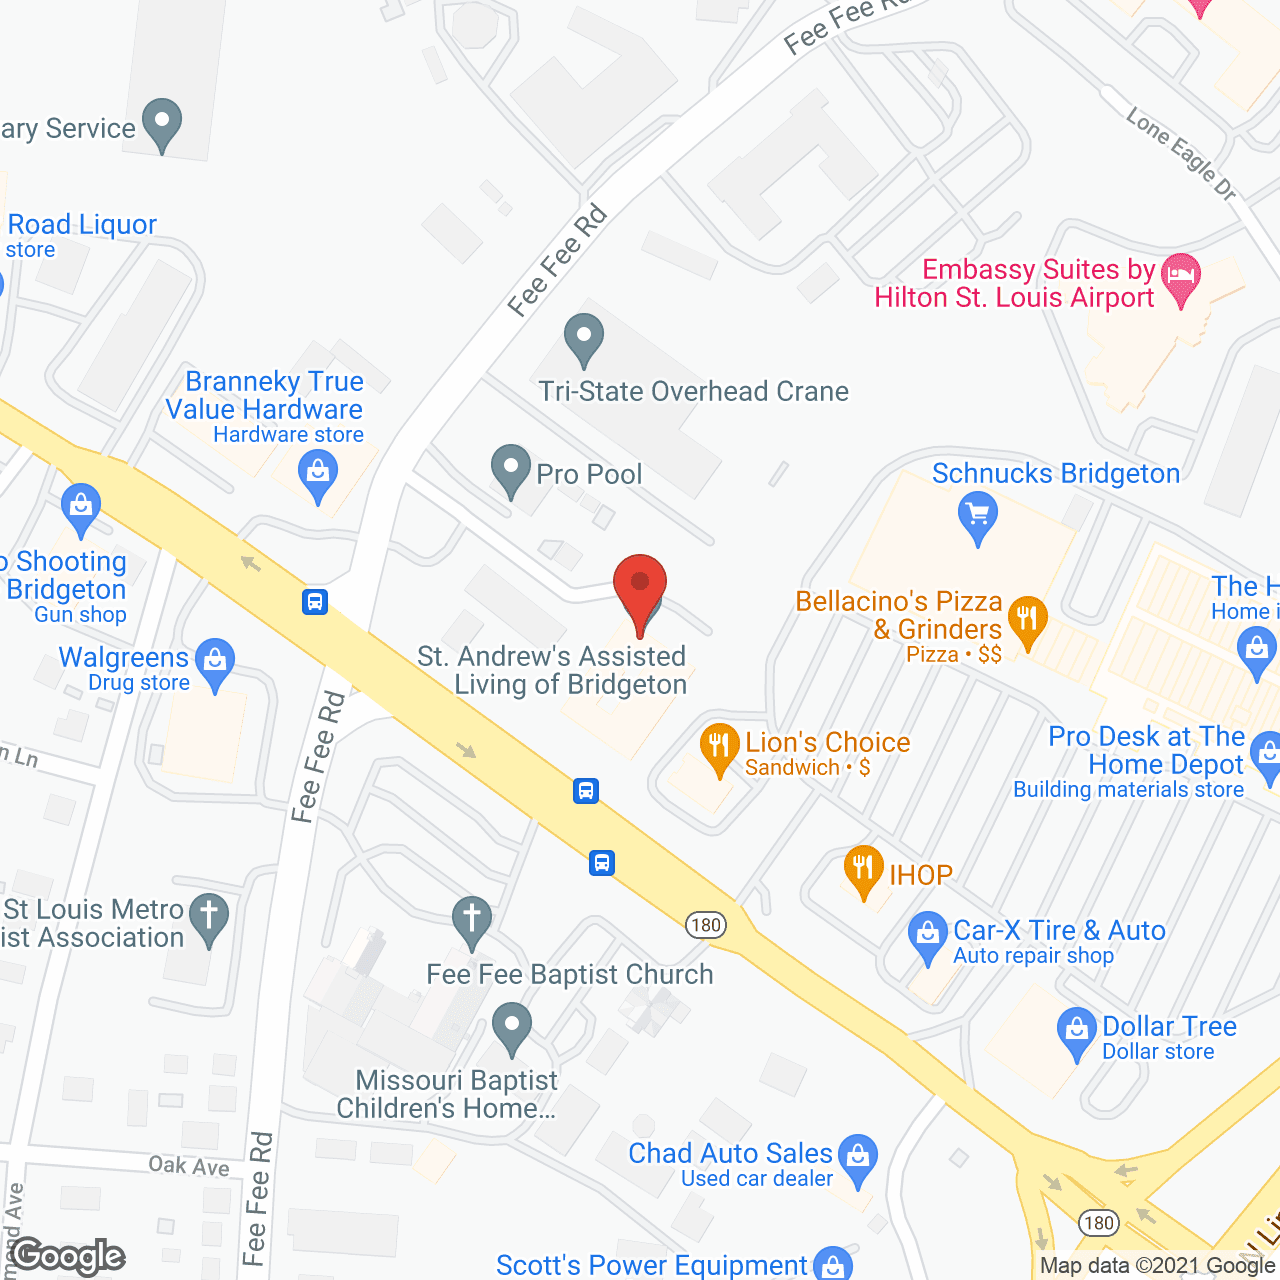 St. Andrew's Assisted Living of Bridgeton in google map